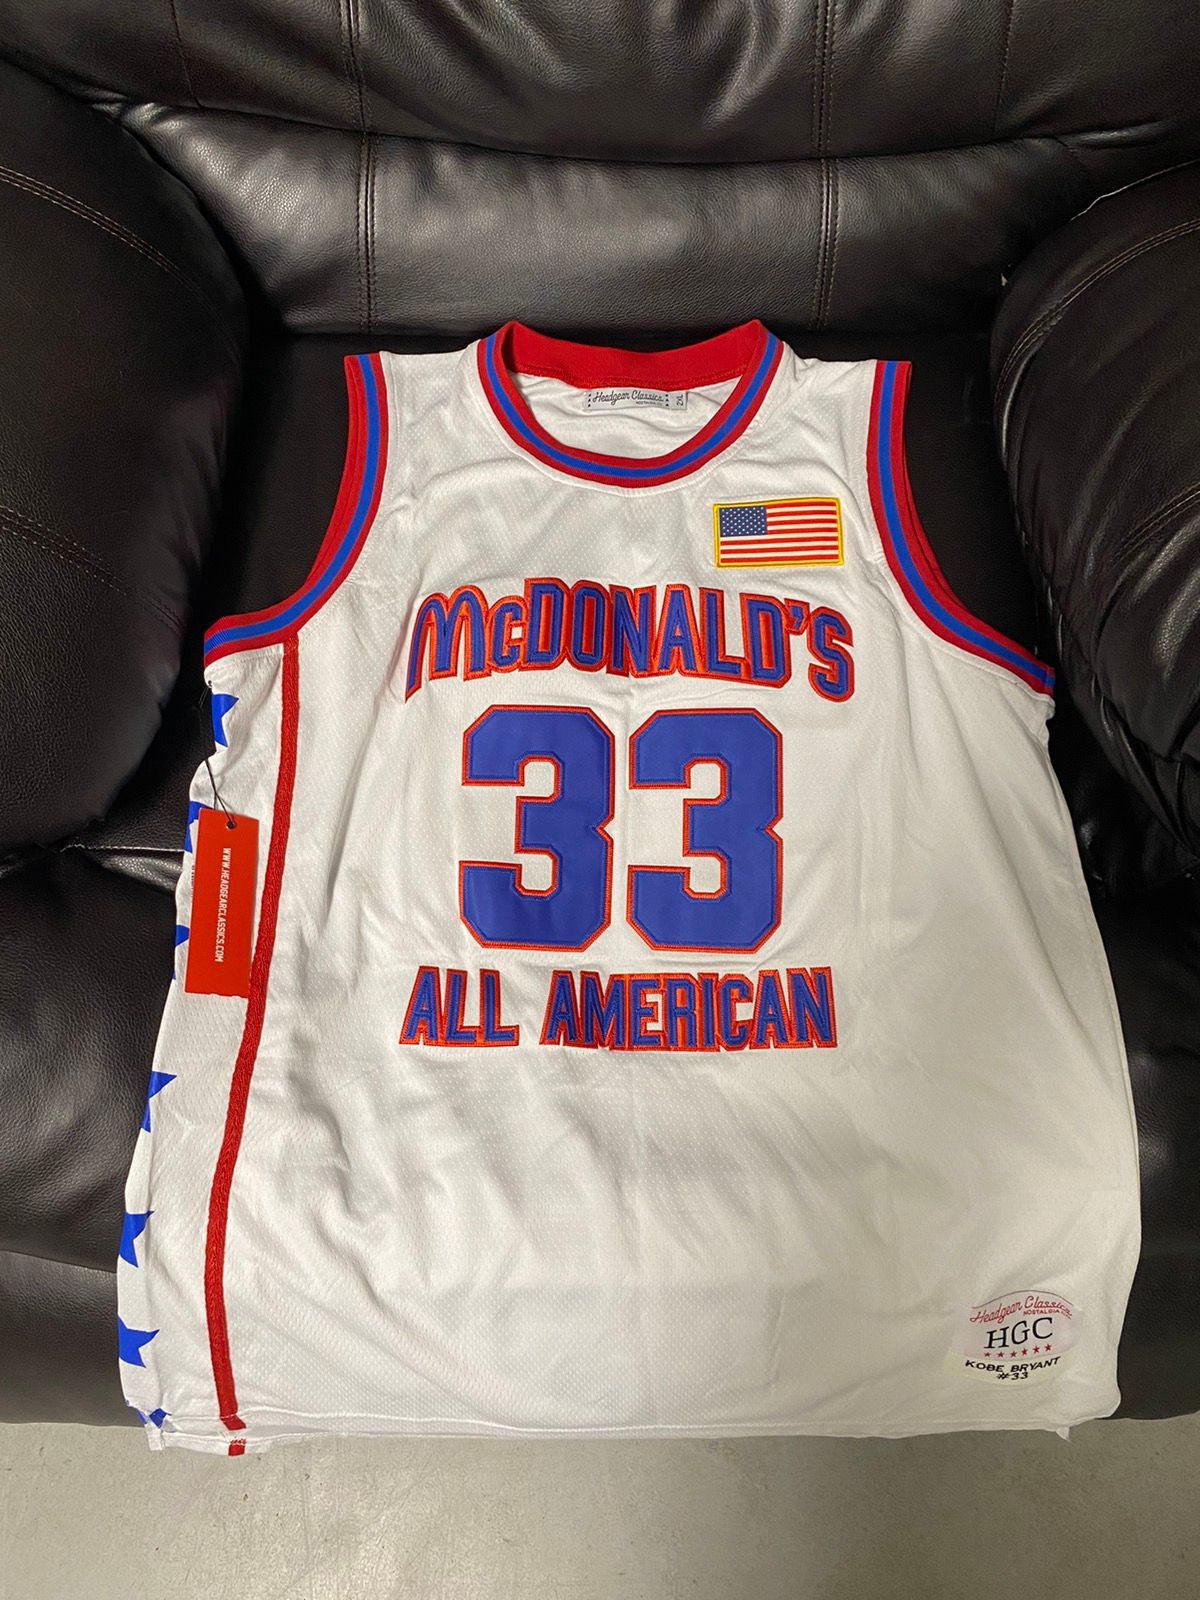 Buy Men's McDonald's All American 33 Bryant Blue White Basketball Jersey  (Blue, S) Online at Low Prices in India 